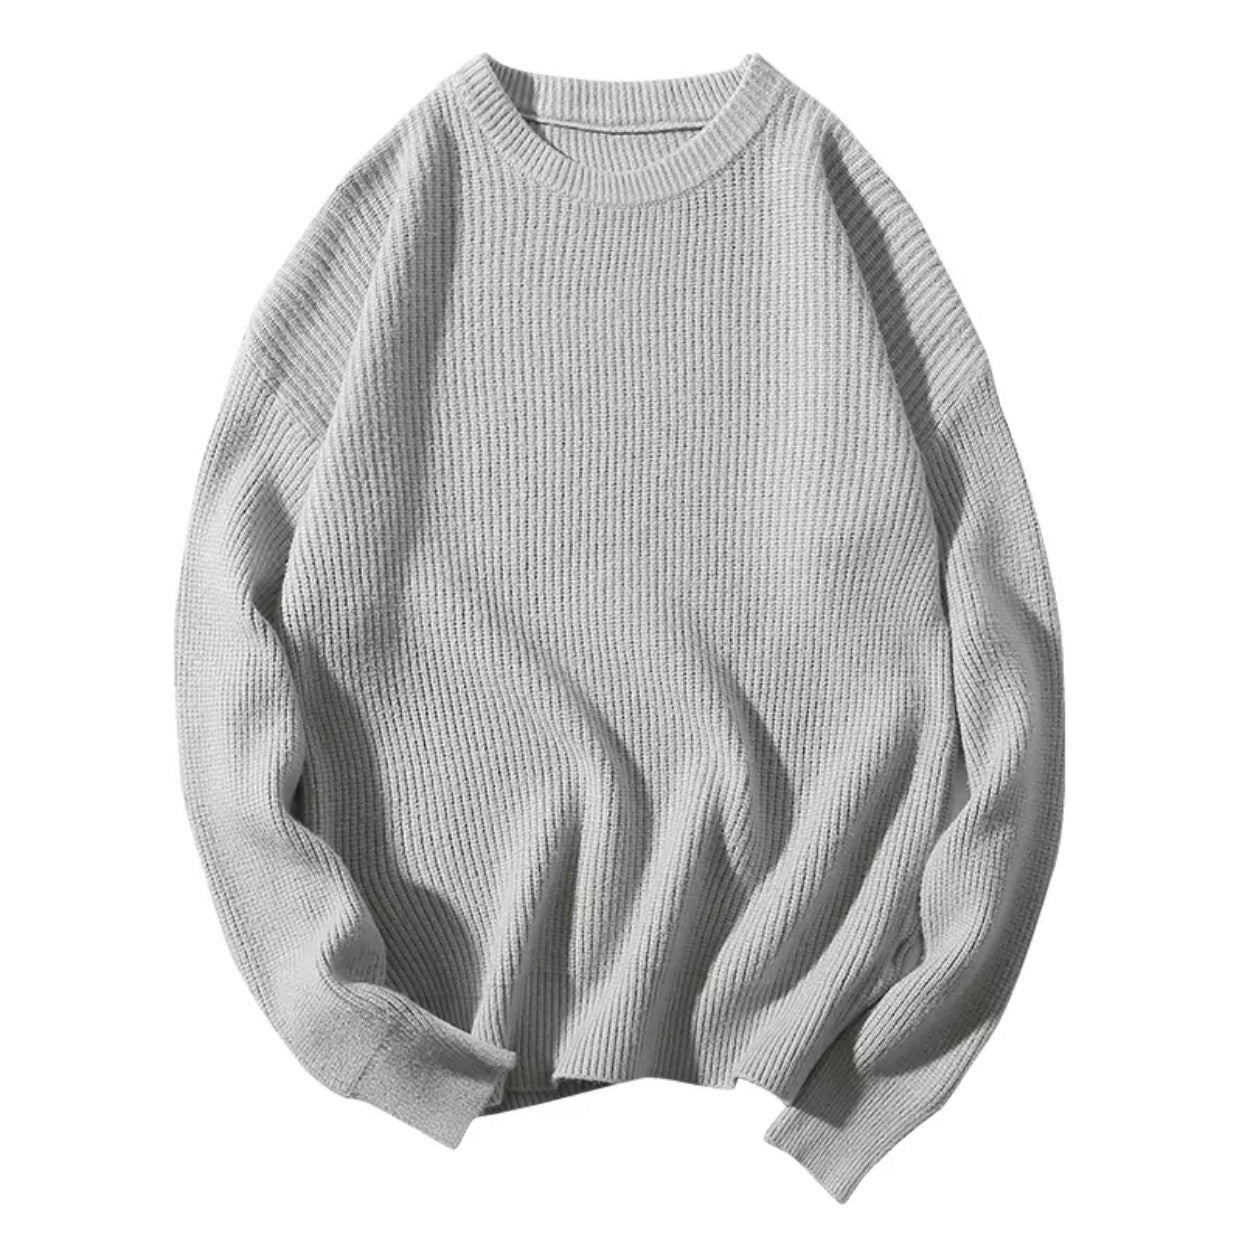 The Everyday Sweater - Up to Size XXXL